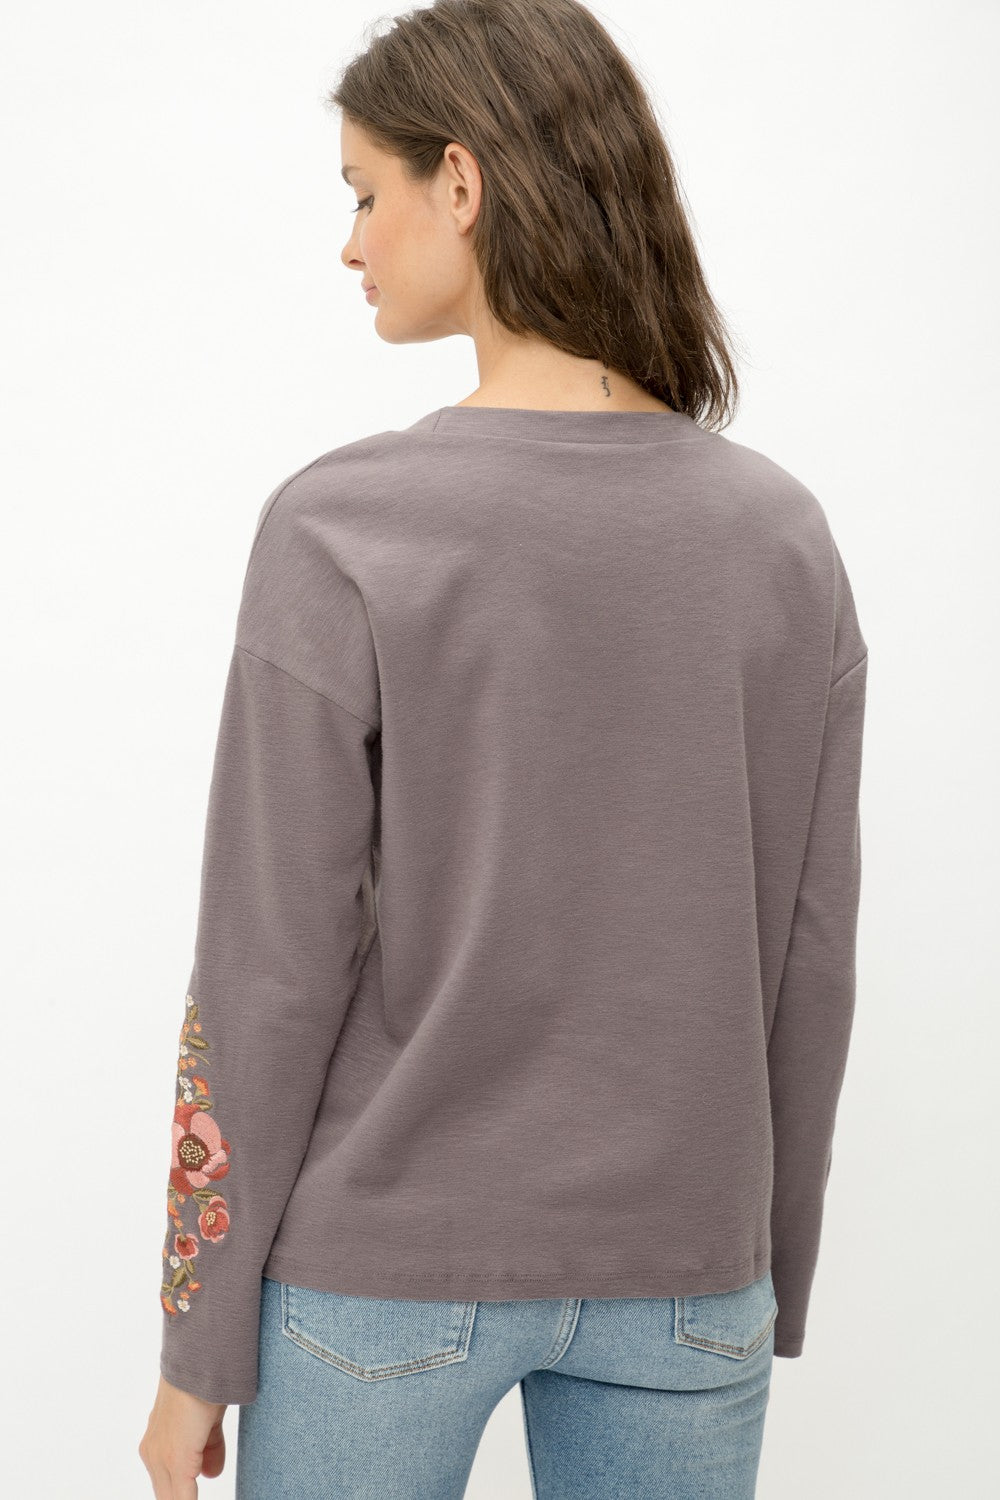 Charcoal Embroidered Longsleeve